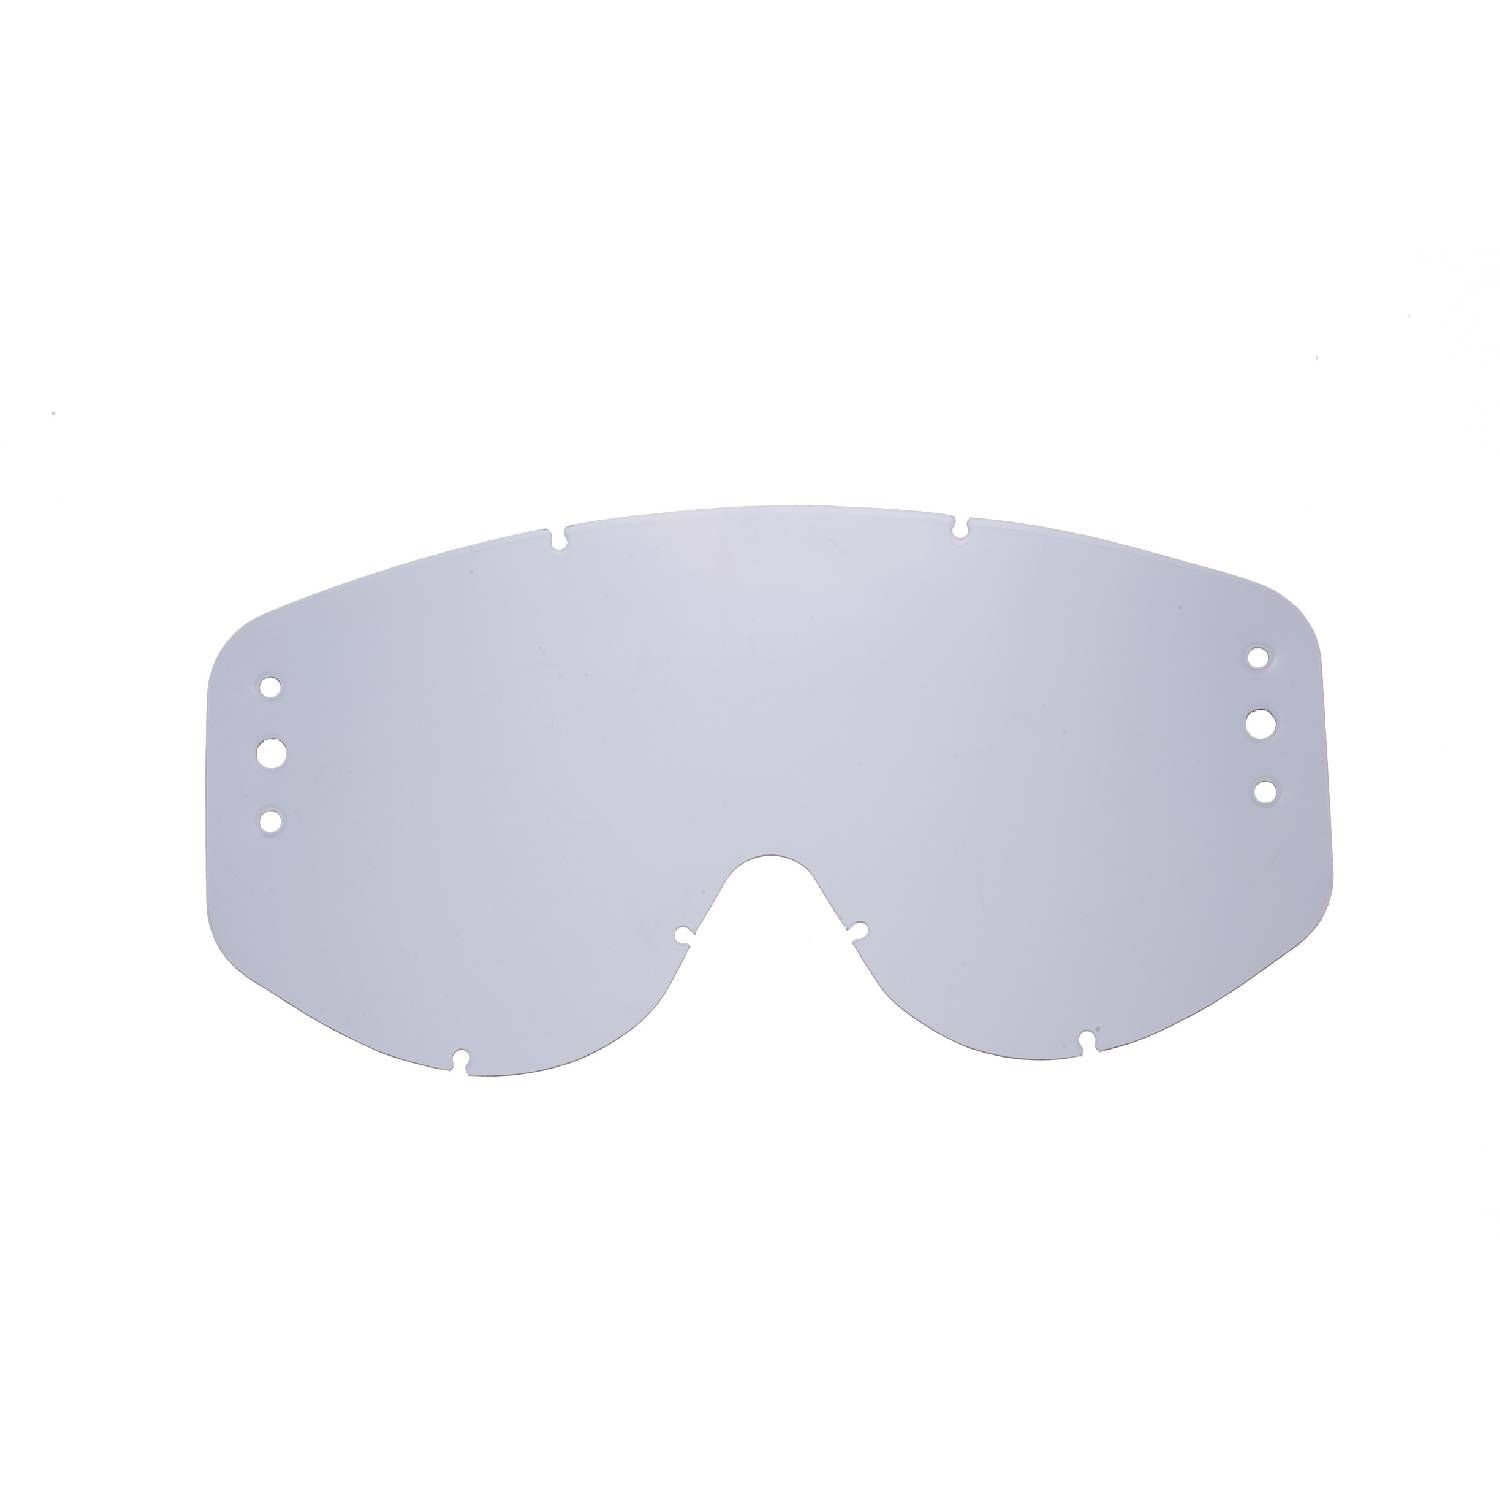 roll off lenses with smokey lenses compatible for Scott 83/89 / Recoil / 89 Xi goggle